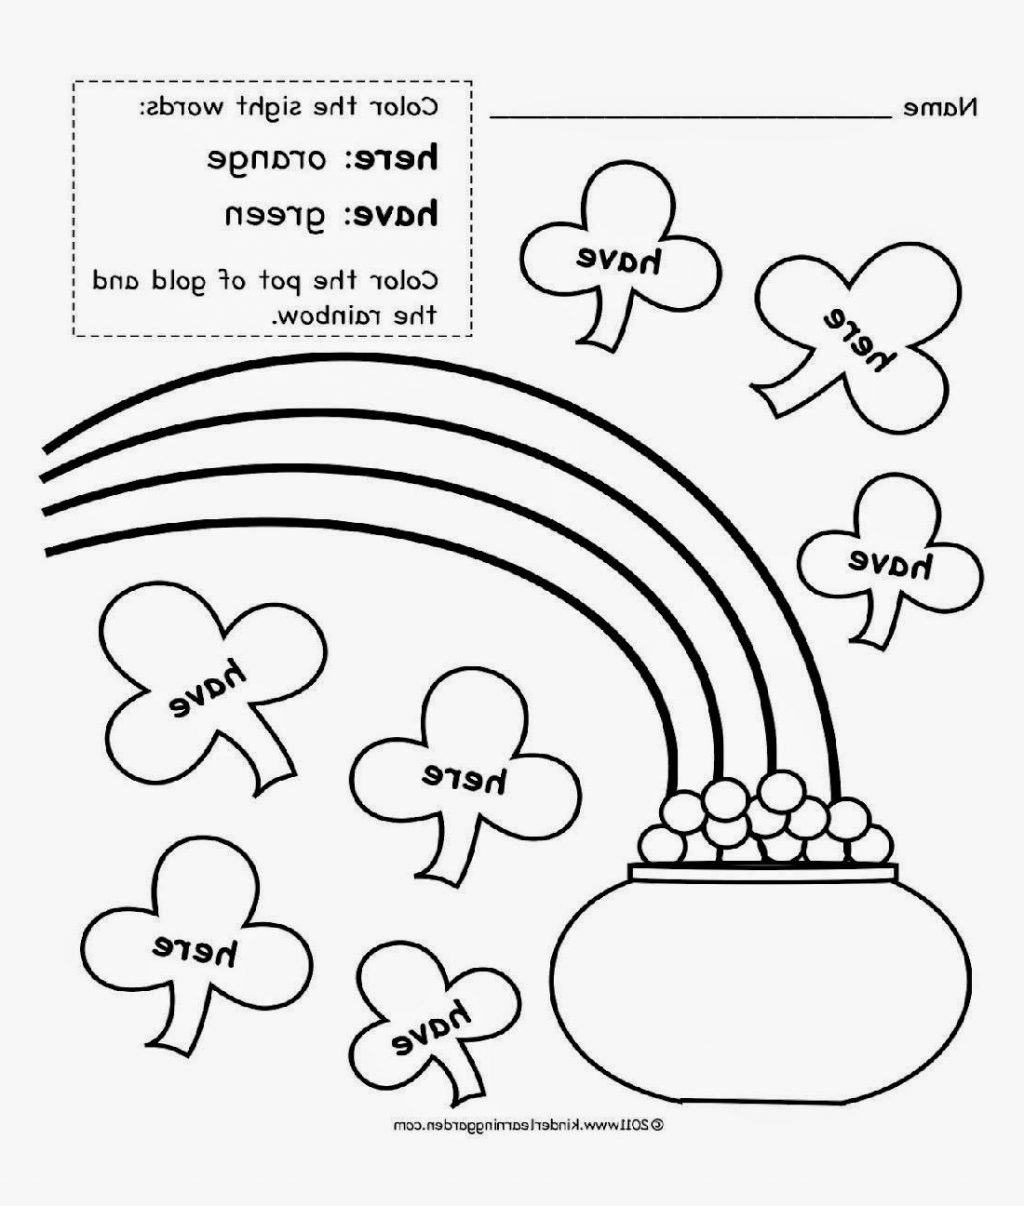 Inspired Image of Word Coloring Page Generator - vicoms.info